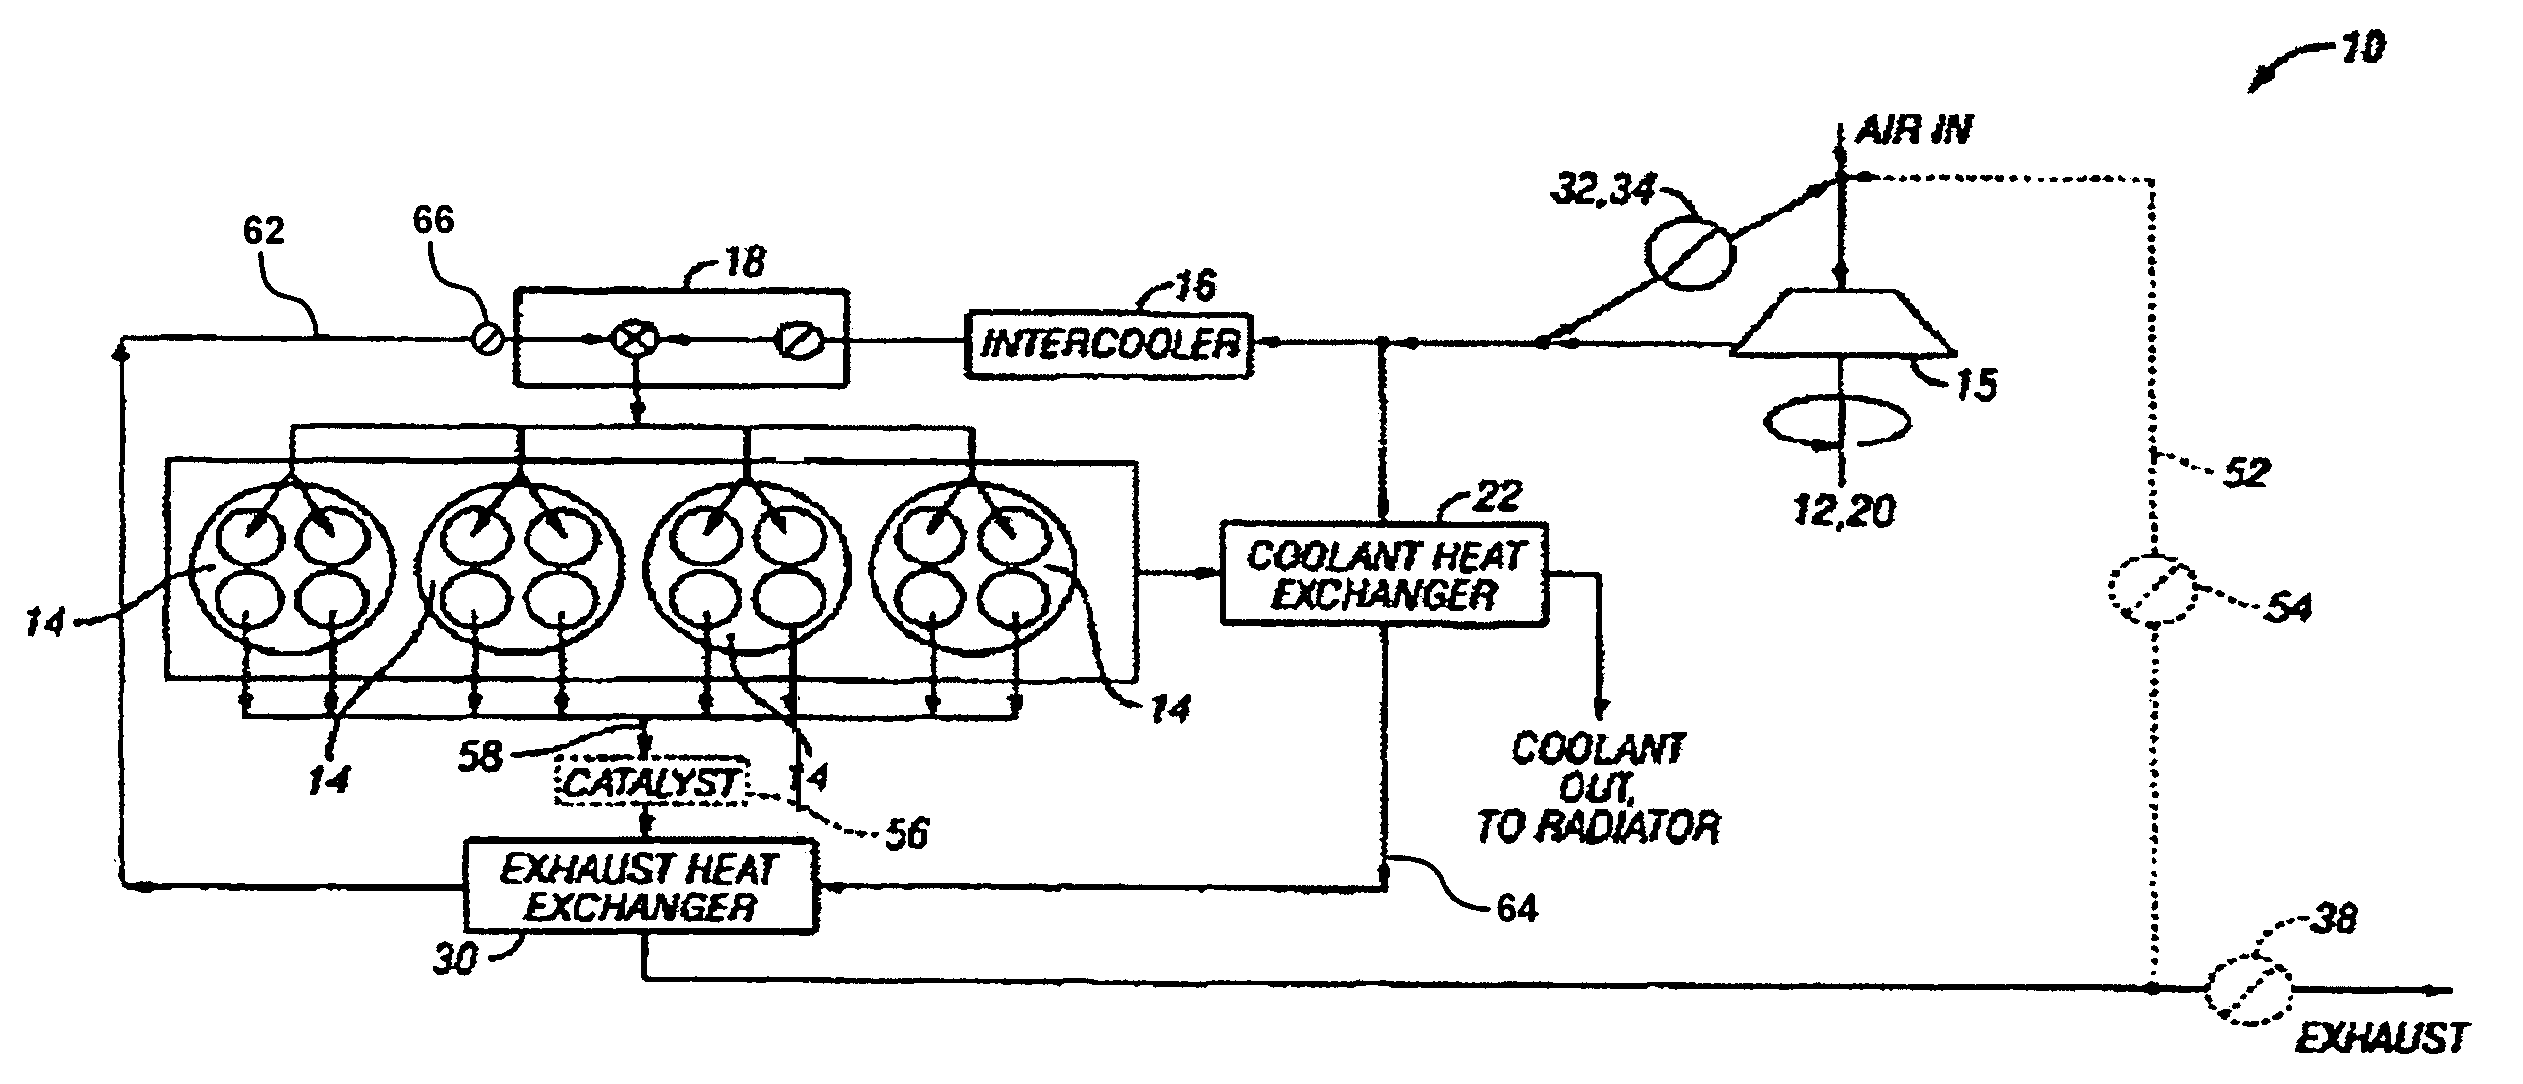 System and method for maintaining heated intake air